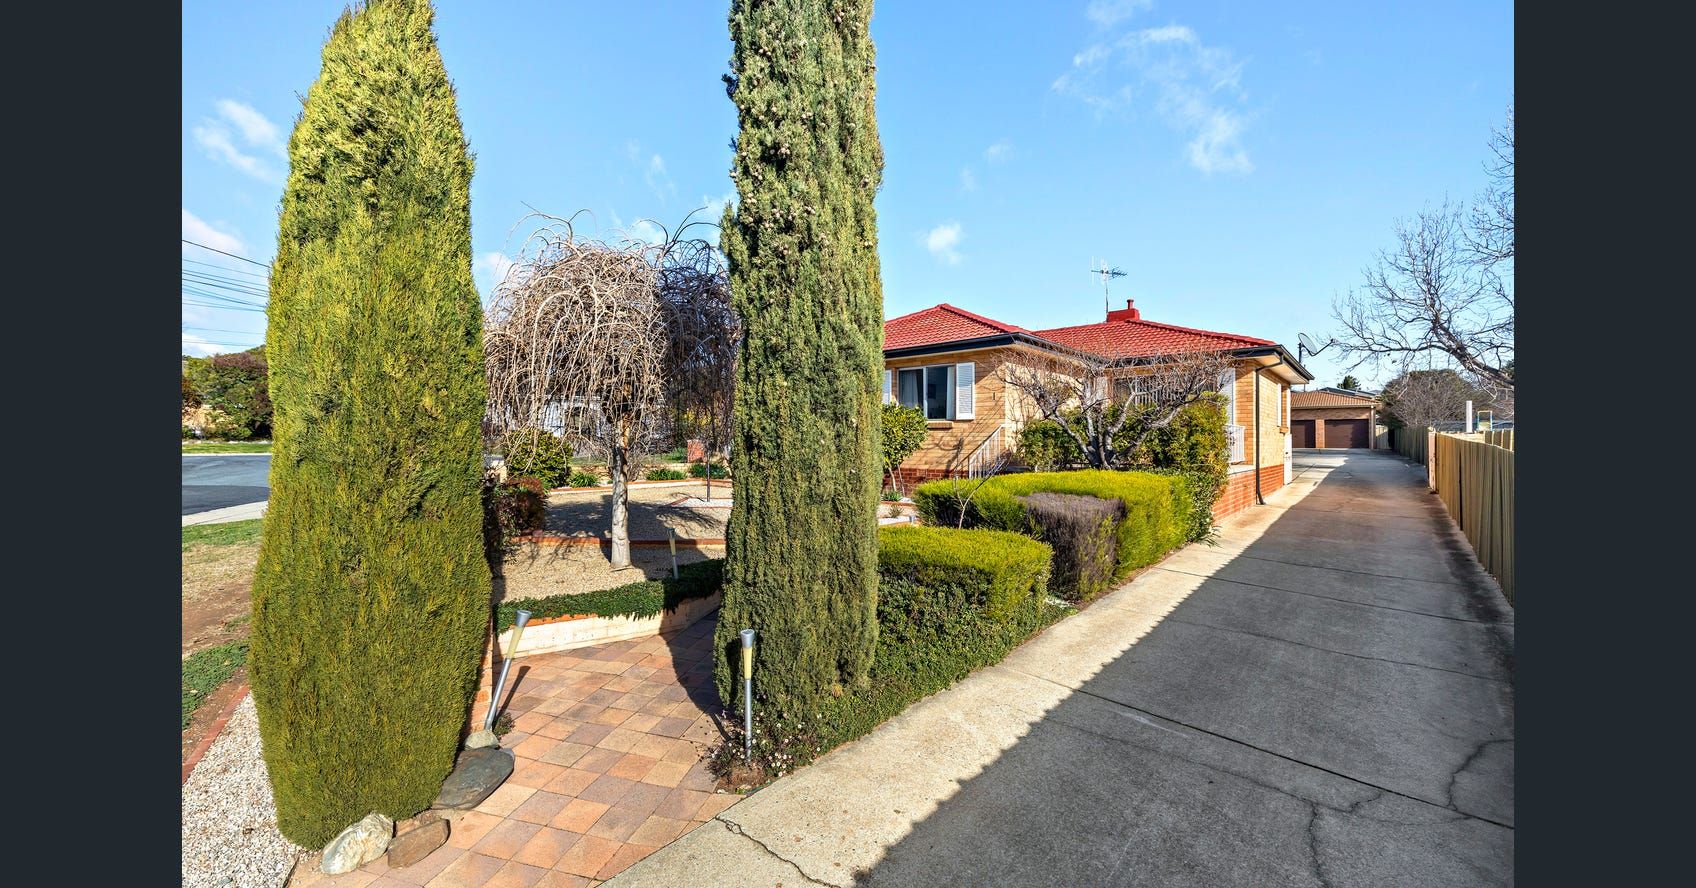 4 bedrooms House in 1/2 Mark Place QUEANBEYAN NSW, 2620